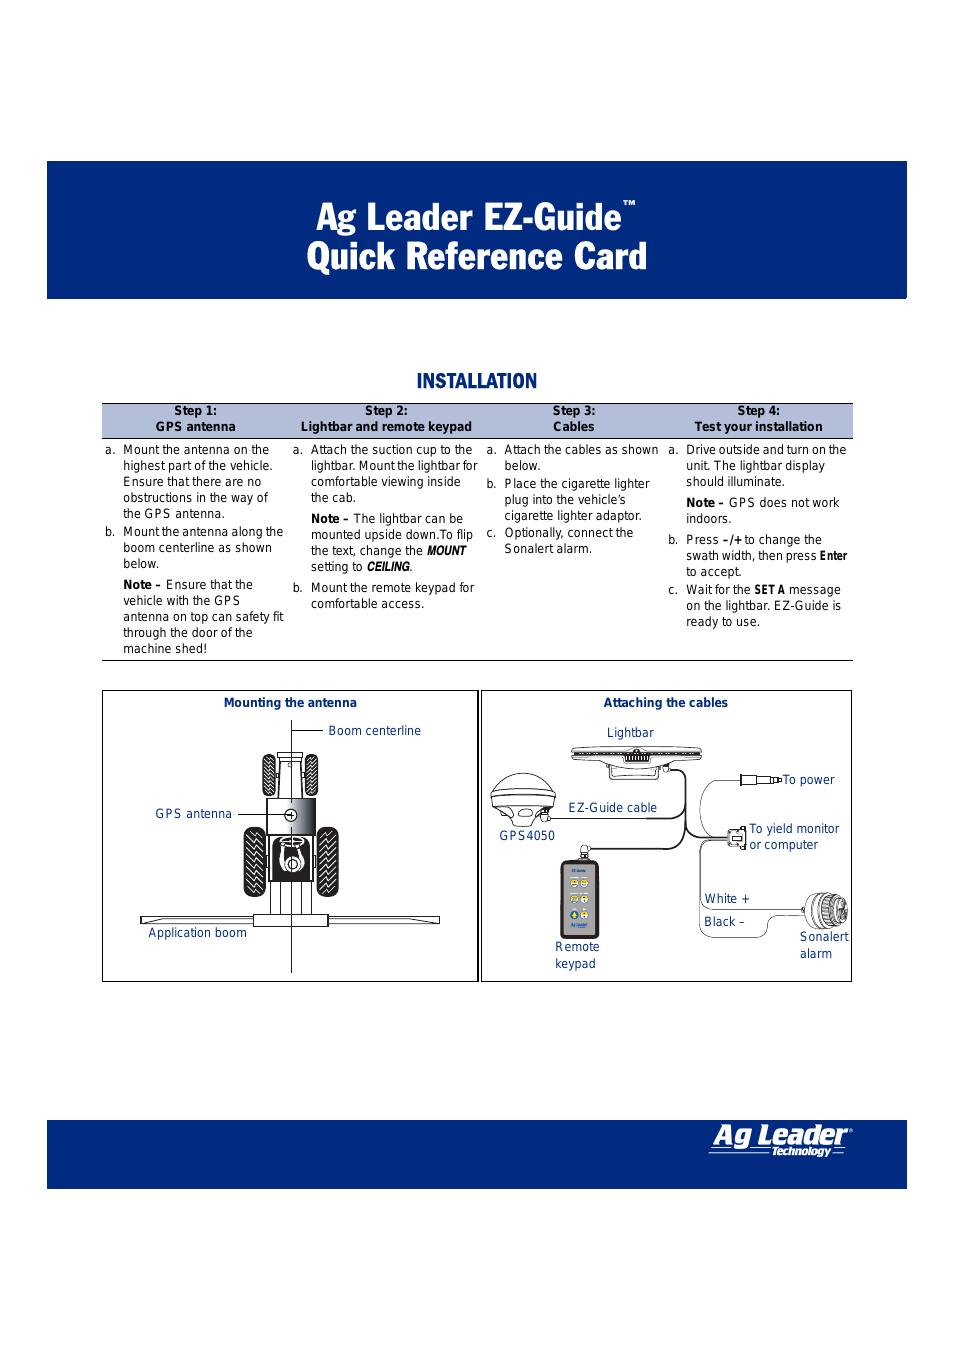 EZ-Guide Quick Reference Guide